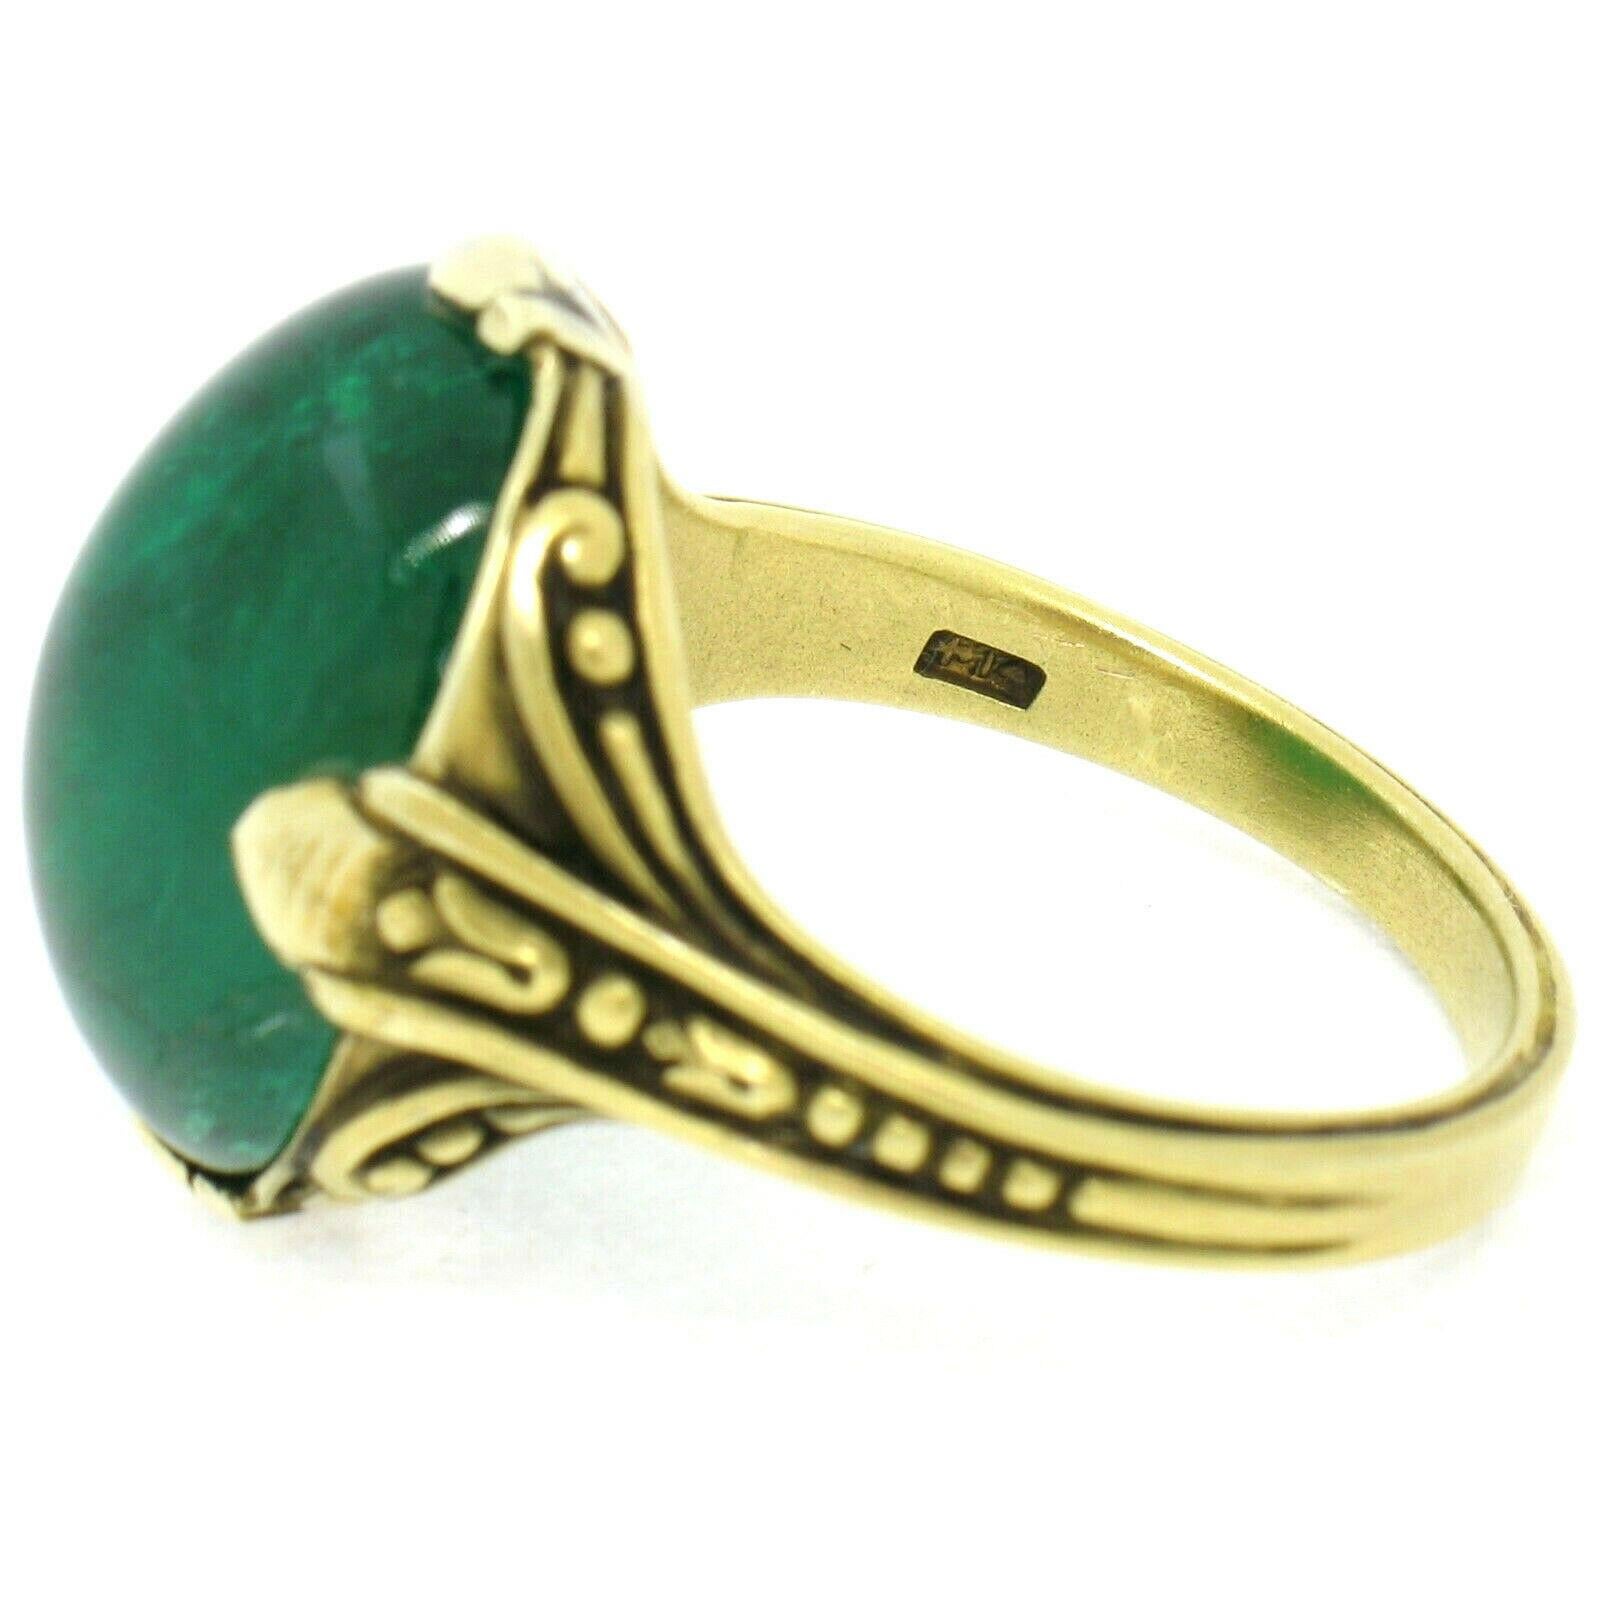 Antique 14k Gold 10.03ct GIA Oval Cabochon Very Fine Green Zambian Emerald Ring 4